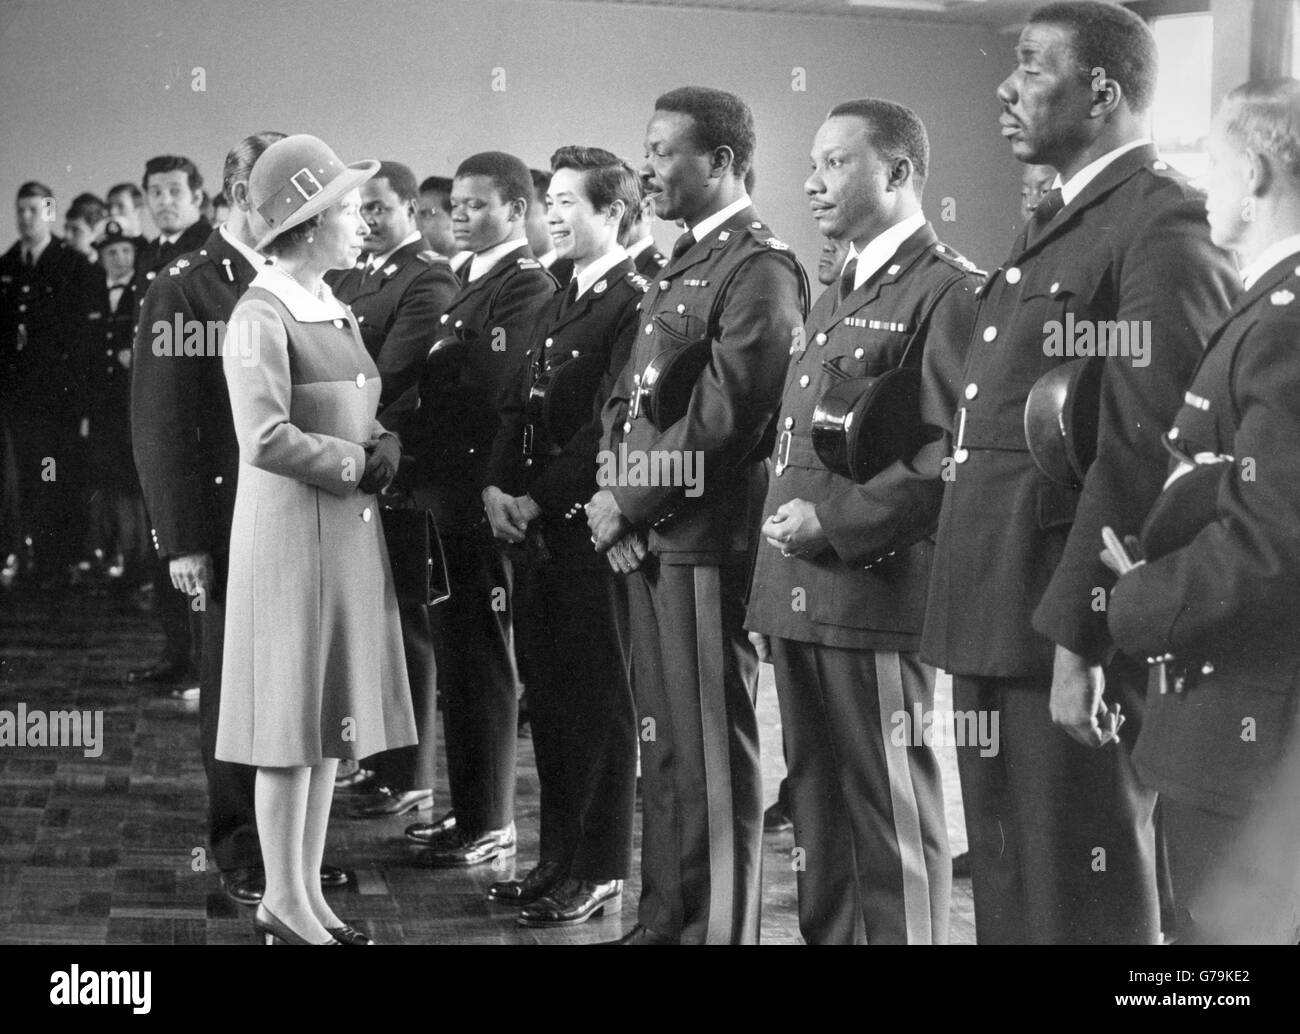 The Queen meets overseas students and instructors at the Peel Centre, the Metropolitan Police Training Complex that she opened at Hendon. *Scan from print. Hi-res version available on request* Stock Photo